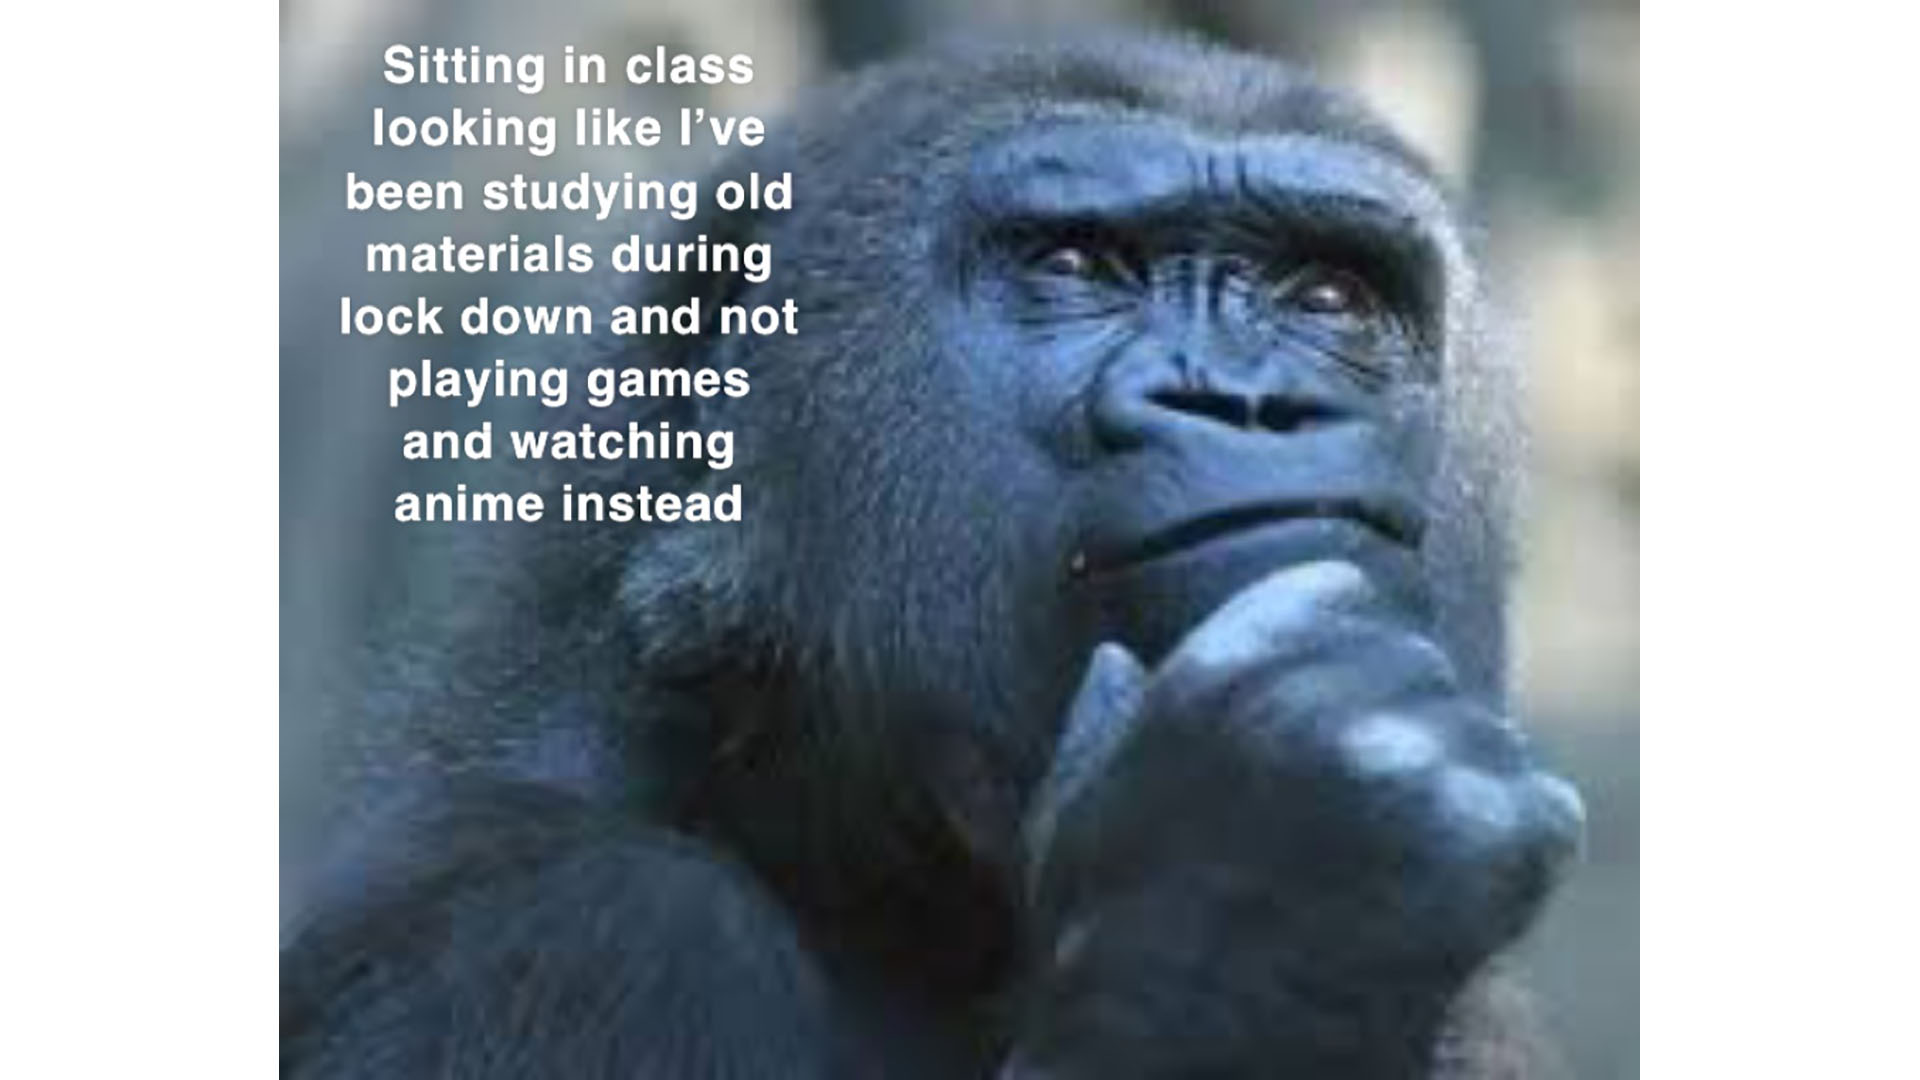 Title: Sitting in class looking like I've been studying old materials during lock down and not playing game and watching anime instead. A close-up of a gorilla looking wistfully into the sky.